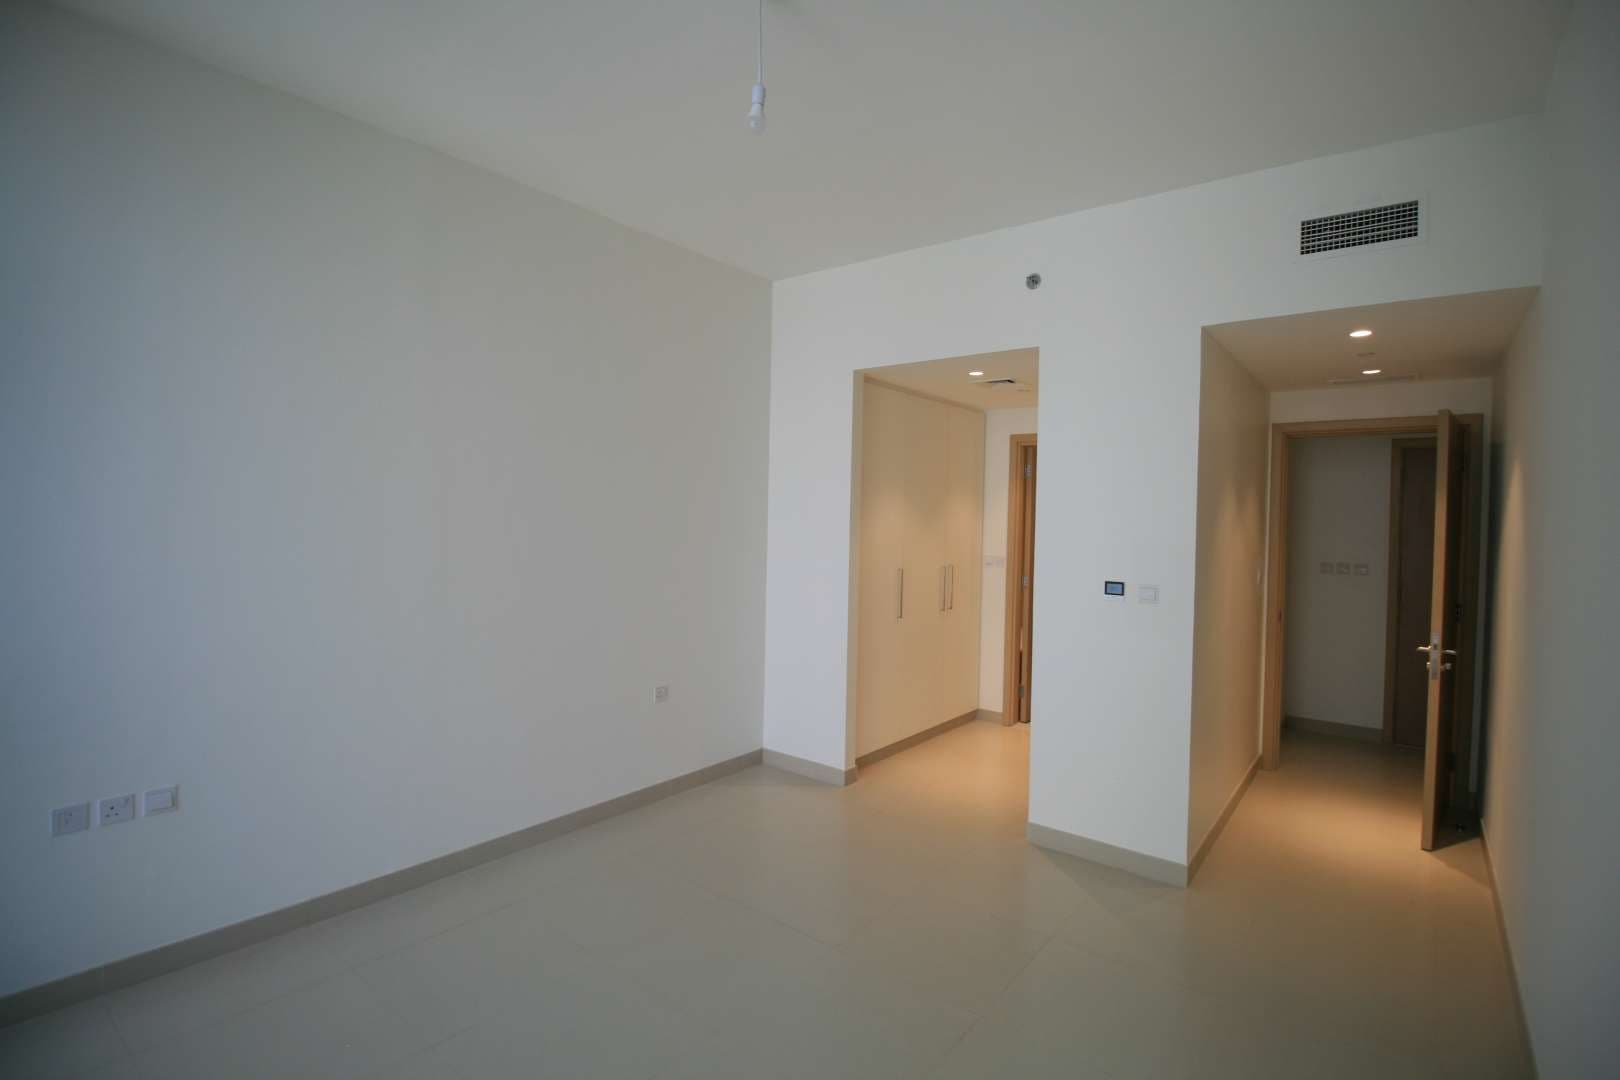 2 Bedroom Apartment For Rent Acacia Park Heights Lp05570 26487b9731990400.jpg